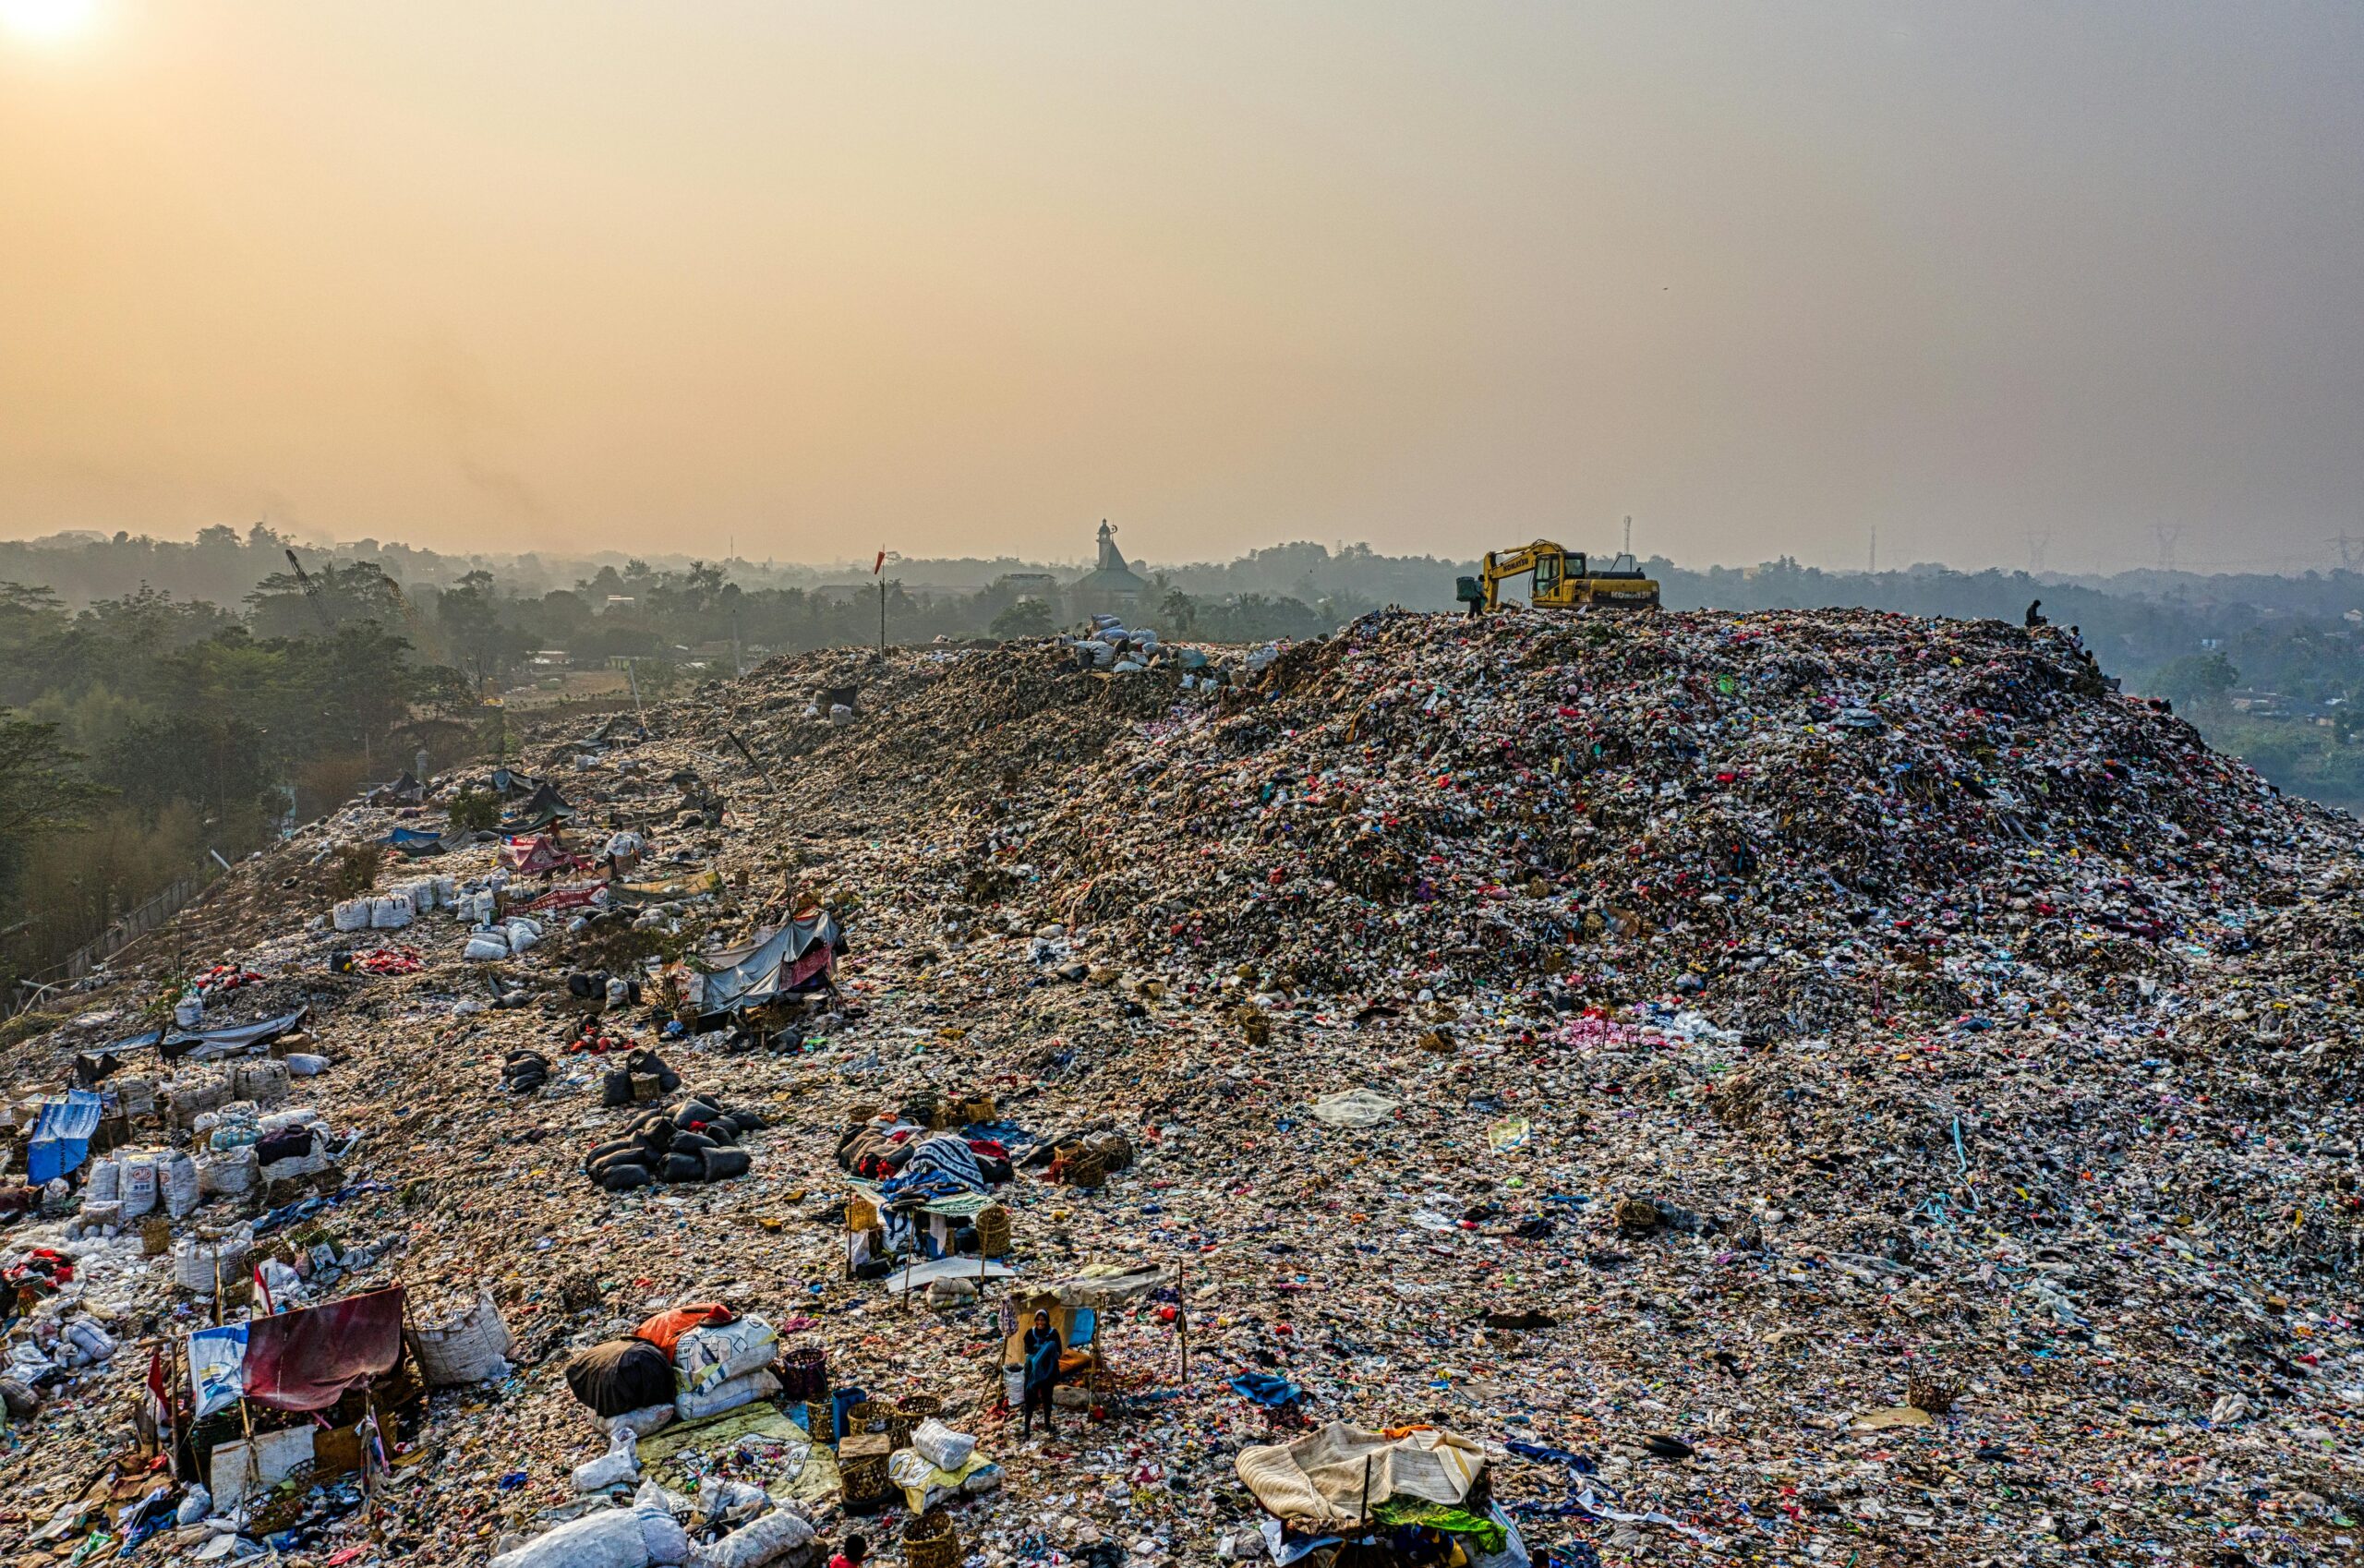 The Problems with Landfill: Why Landfill is Bad for the Environment